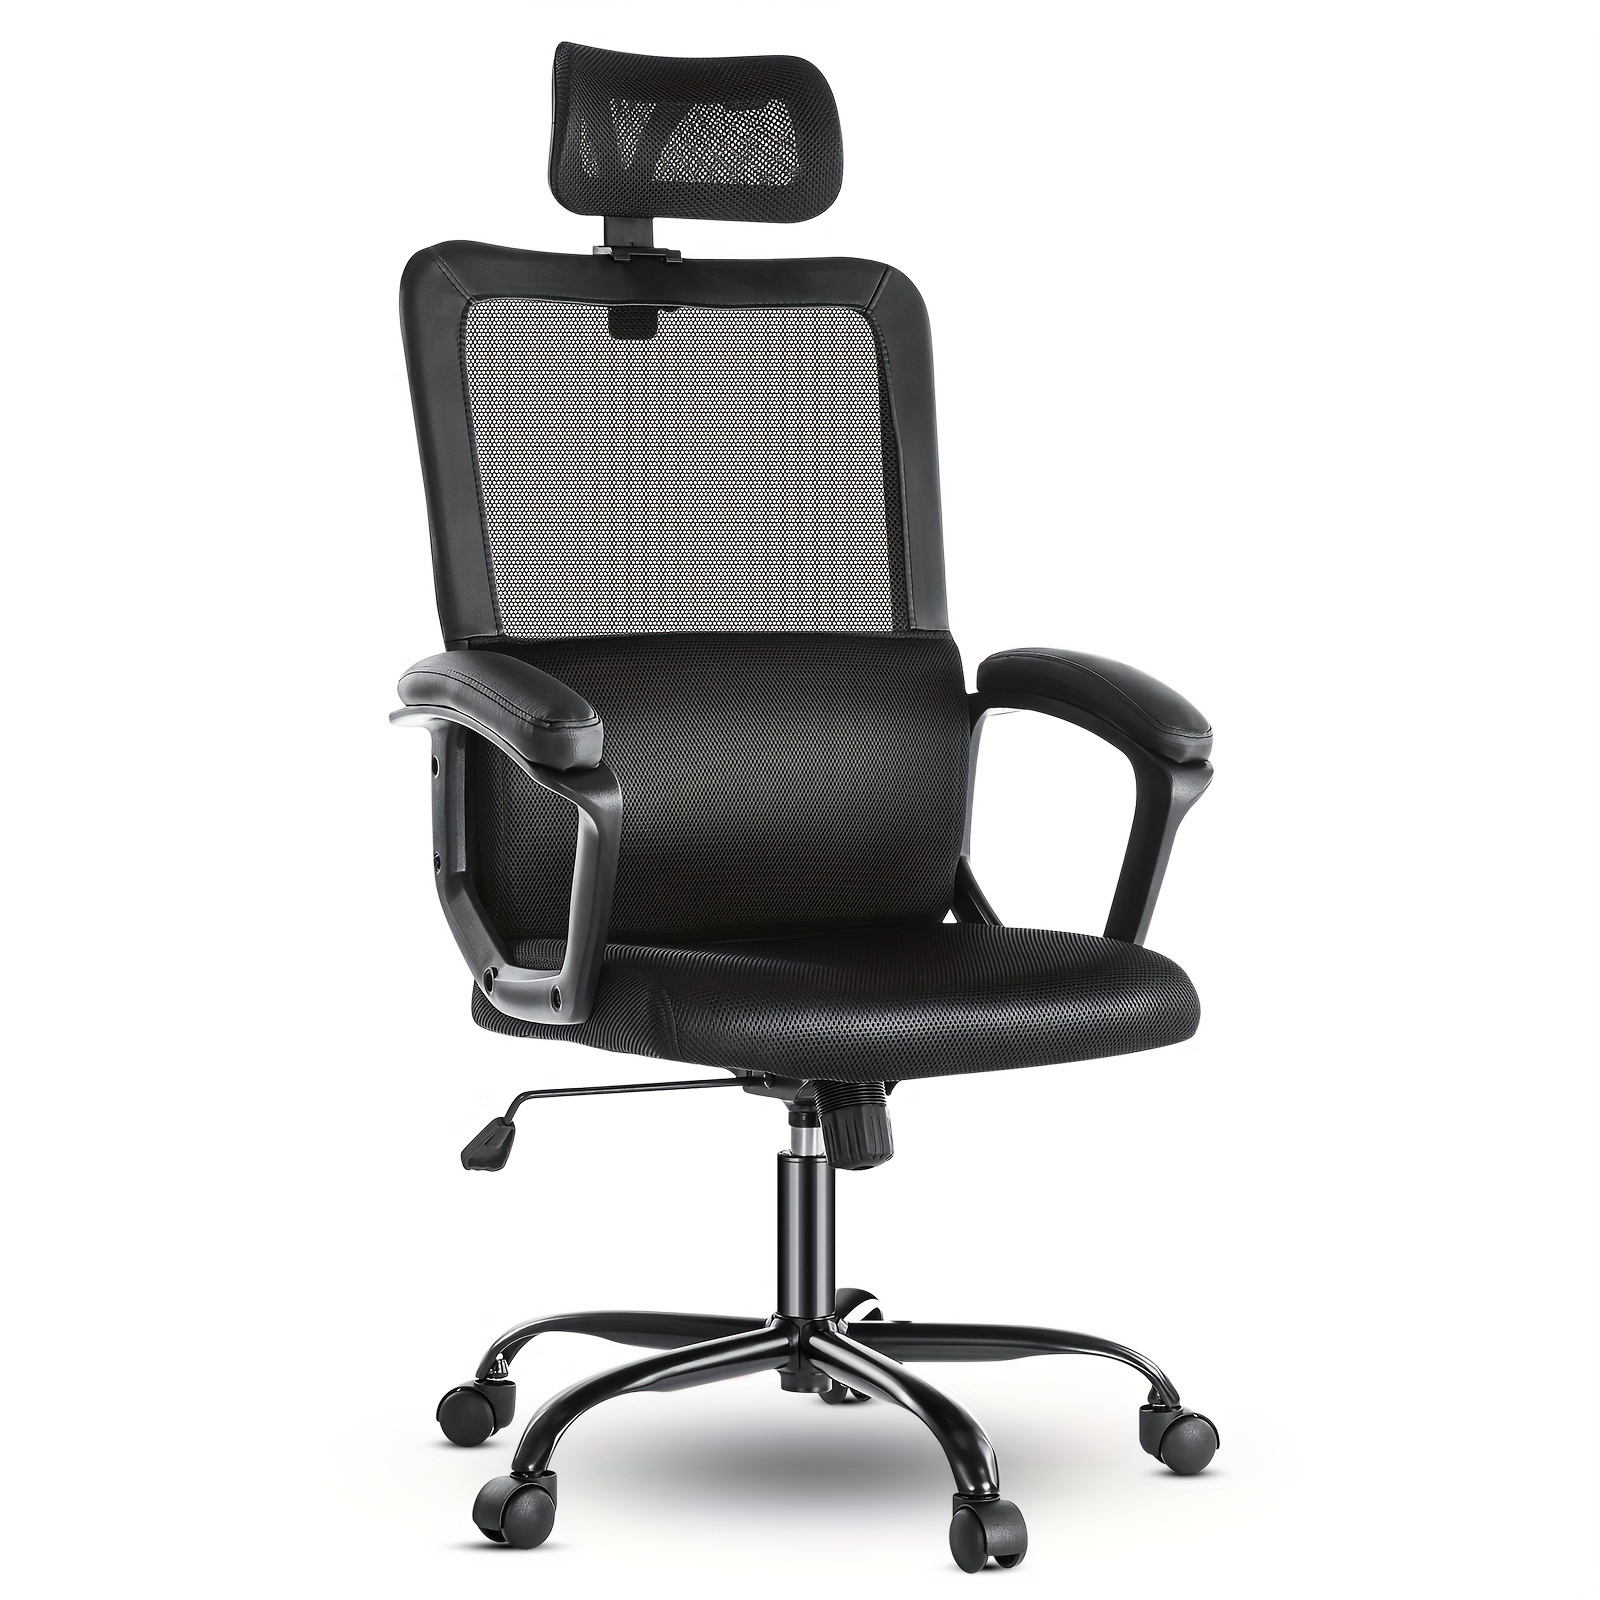 

Office Desk Computer Chair, Ergonomic High Back Comfy Swivel Gaming Home Mesh Chairs With Wheels, Lumbar Support, Adjustable Headrest, Comfortable Pillow, Soft Arms, 120°tilt For Bedroom, Study